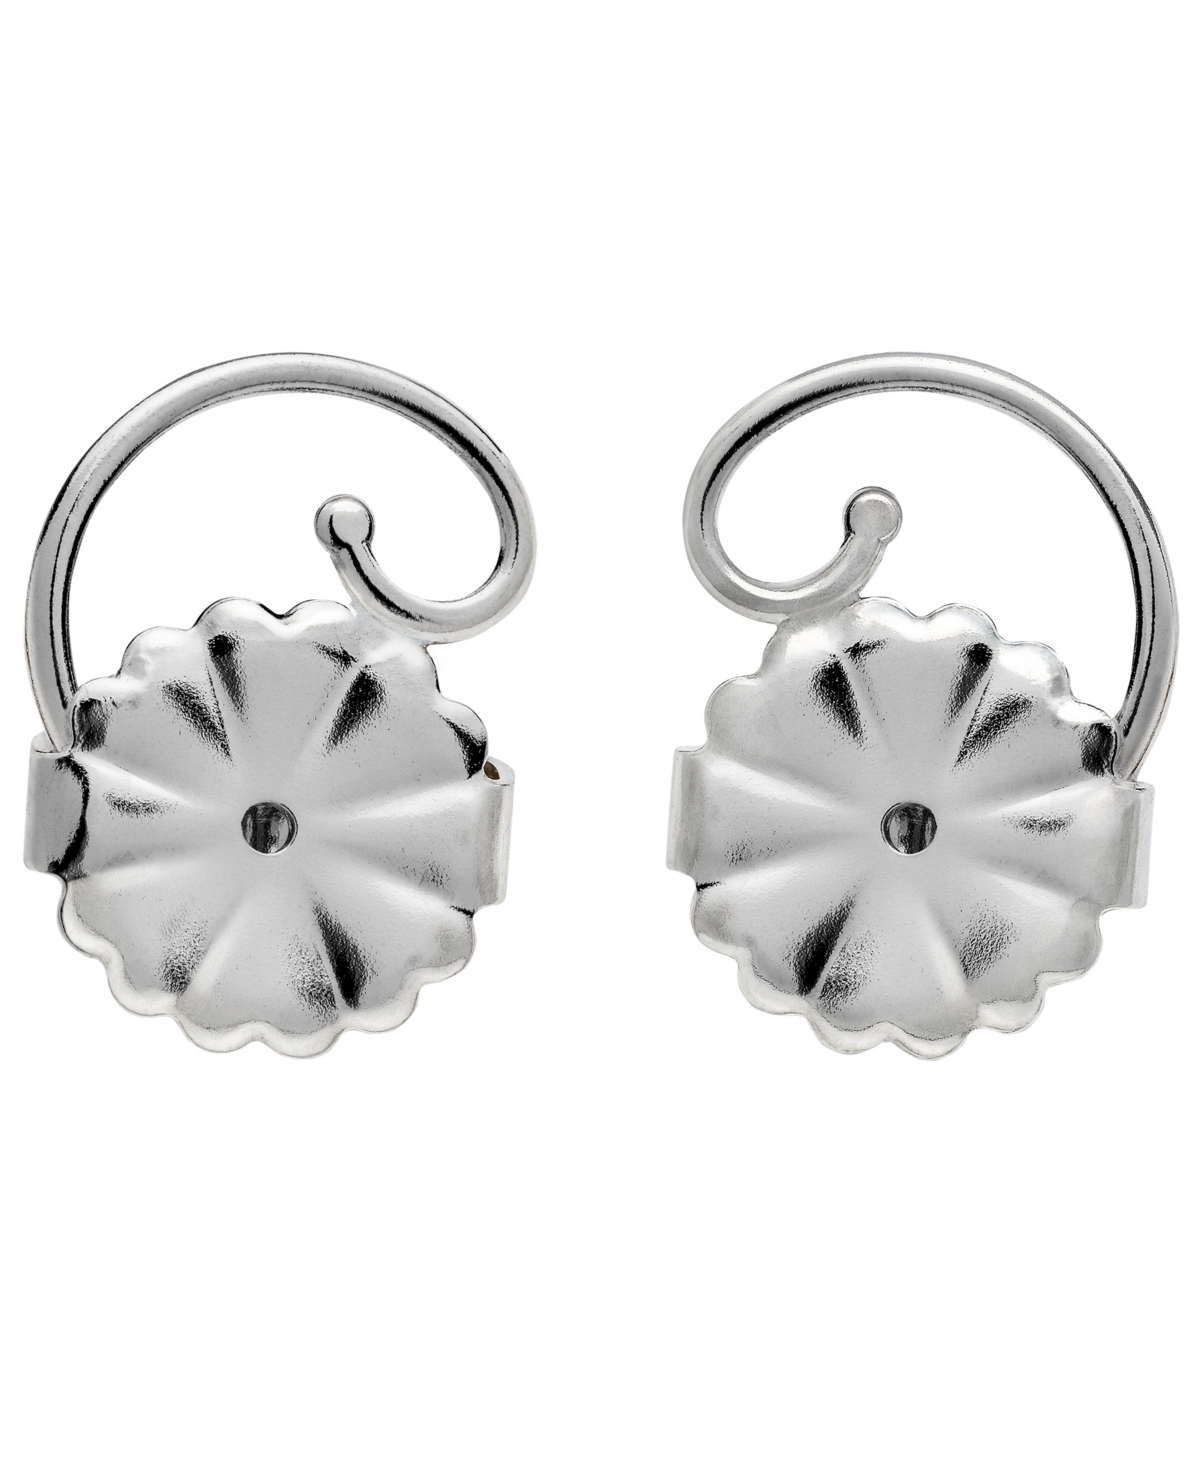 Levears Earring Backs in Sterling Silver & Reviews - Jewelry & Watches -  Macy's